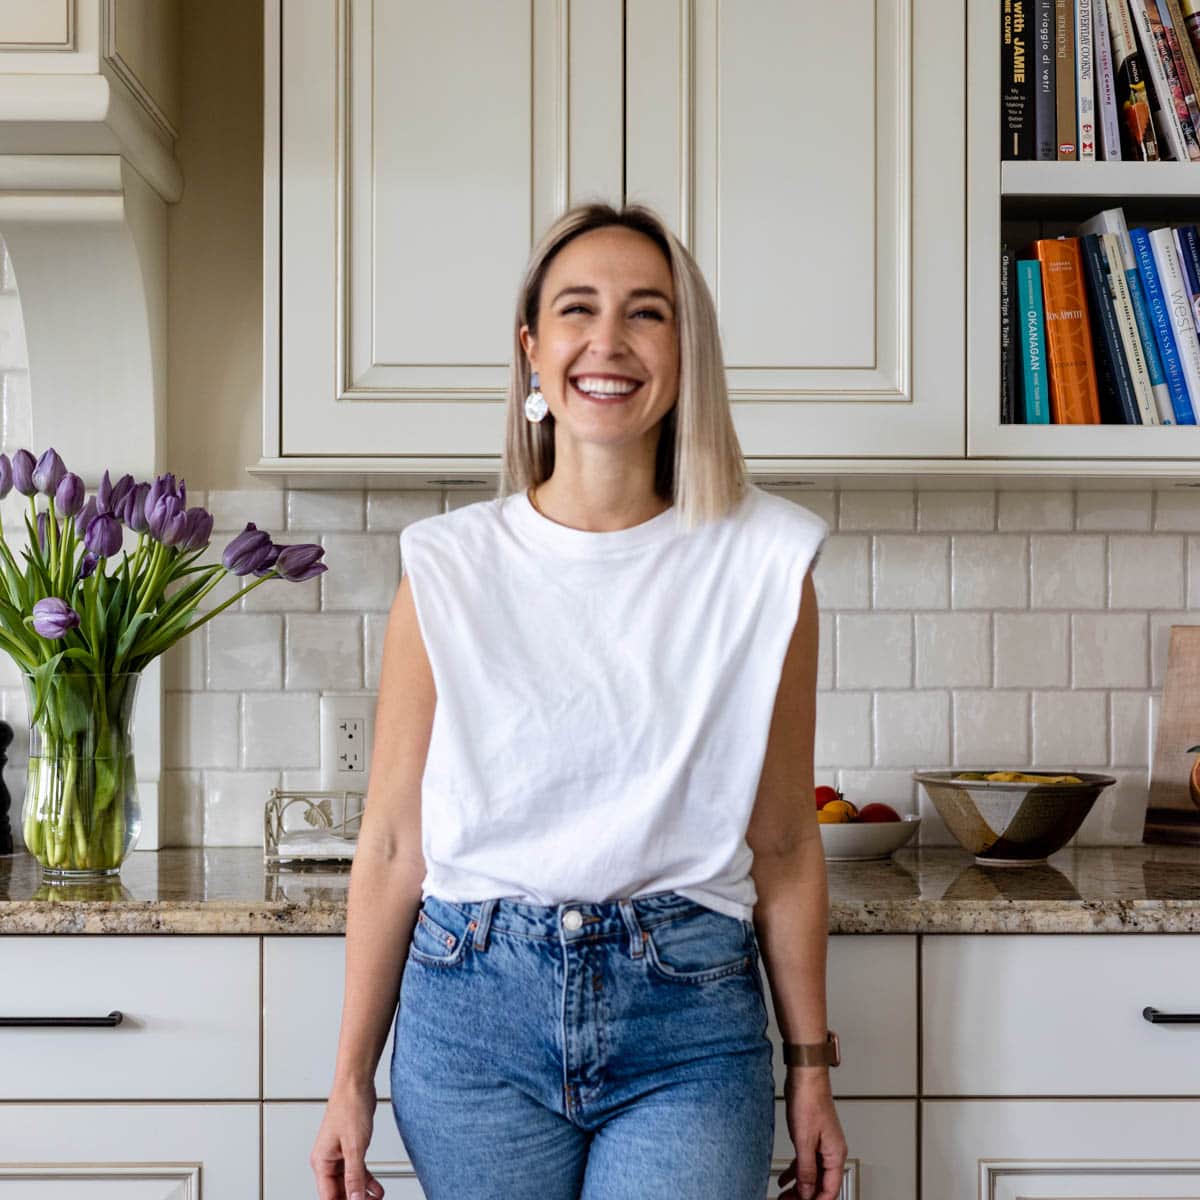 Girl smiling in the kitchen with purple tulips nearby.